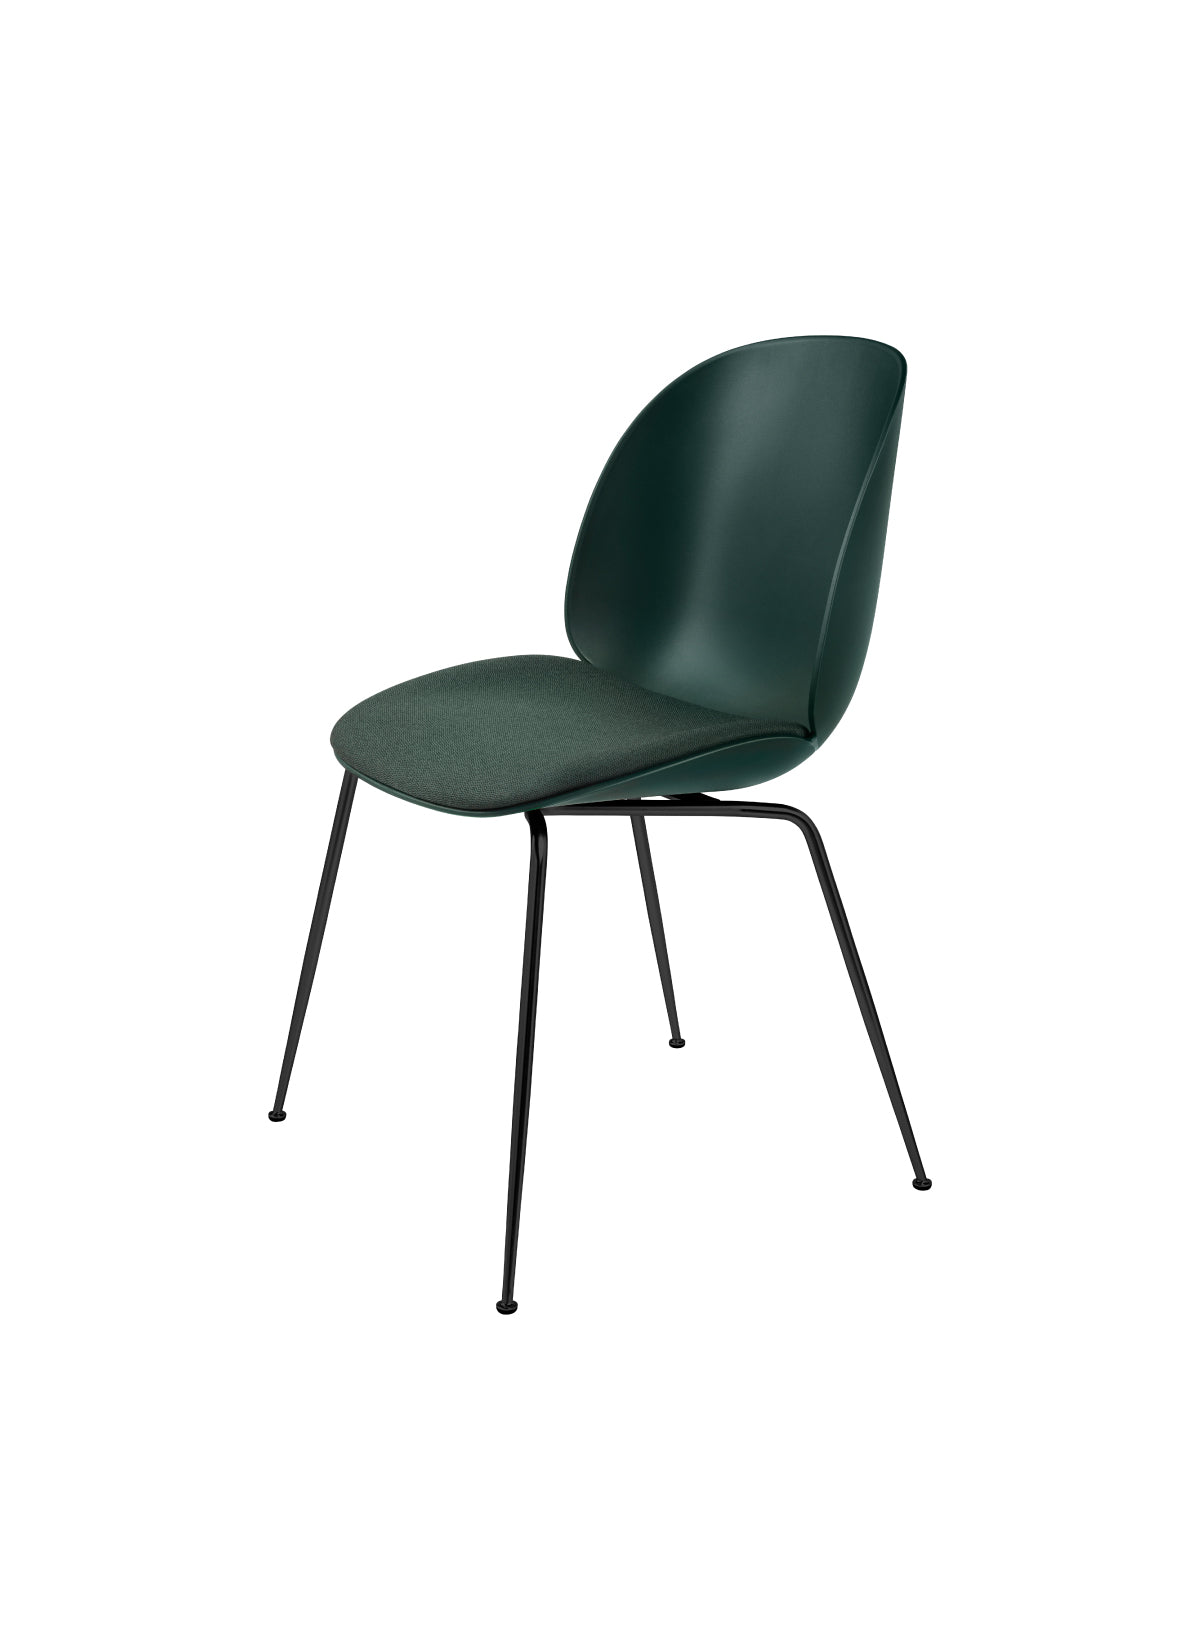 Beetle Dining Chair - Seat Upholstered - Conic Base by Gubi